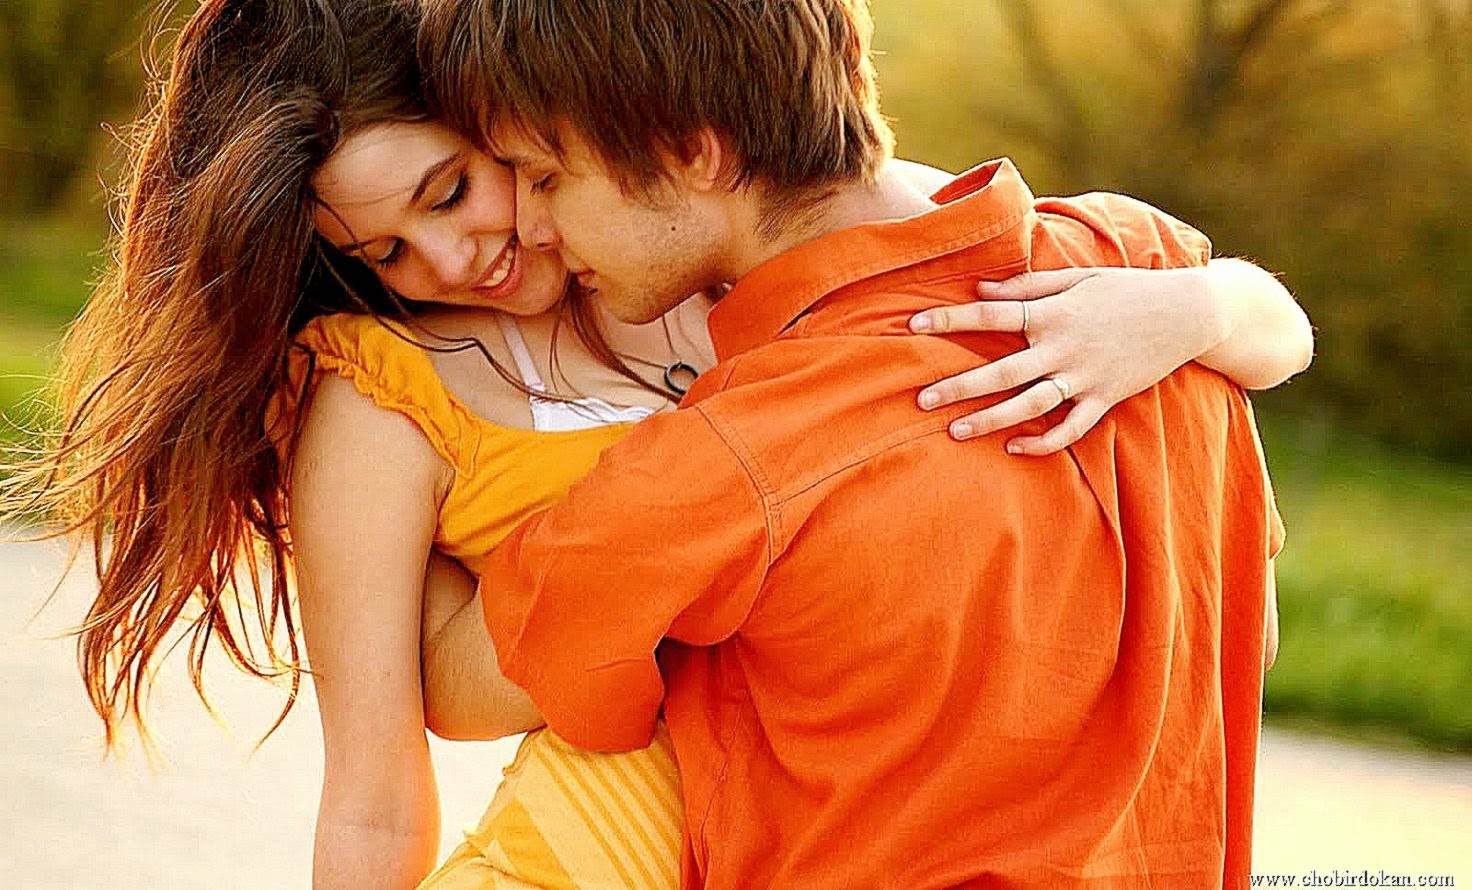 Romantic Couple Wallpapers Free HD Wallpapers